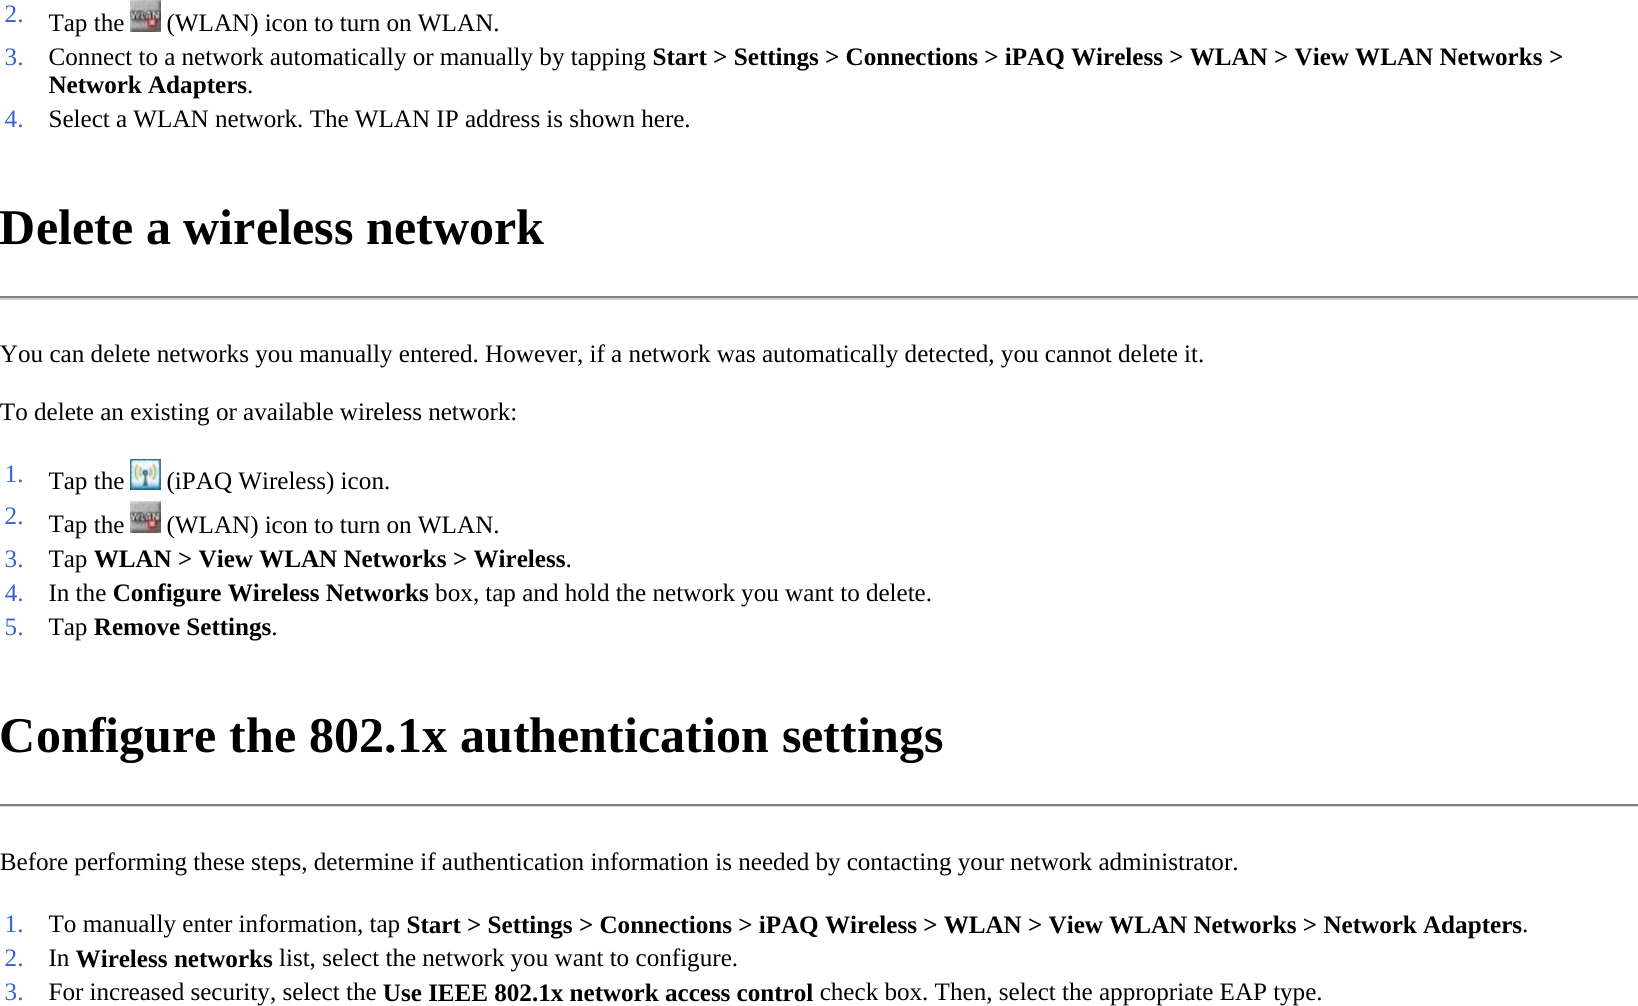 Delete a wireless network  You can delete networks you manually entered. However, if a network was automatically detected, you cannot delete it.  To delete an existing or available wireless network:  Configure the 802.1x authentication settings  Before performing these steps, determine if authentication information is needed by contacting your network administrator.  2. Tap the   (WLAN) icon to turn on WLAN.3. Connect to a network automatically or manually by tapping Start &gt; Settings &gt; Connections &gt; iPAQ Wireless &gt; WLAN &gt; View WLAN Networks &gt; Network Adapters.4. Select a WLAN network. The WLAN IP address is shown here.1. Tap the   (iPAQ Wireless) icon. 2. Tap the   (WLAN) icon to turn on WLAN.3. Tap WLAN &gt; View WLAN Networks &gt;Wireless.4. In the Configure Wireless Networks box, tap and hold the network you want to delete.5. Tap Remove Settings.1. To manually enter information, tap Start &gt; Settings &gt; Connections &gt;iPAQ Wireless &gt; WLAN &gt;View WLAN Networks &gt;Network Adapters.2. In Wireless networks list, select the network you want to configure.3. For increased security, select the Use IEEE 802.1x network access control check box. Then, select the appropriate EAP type.